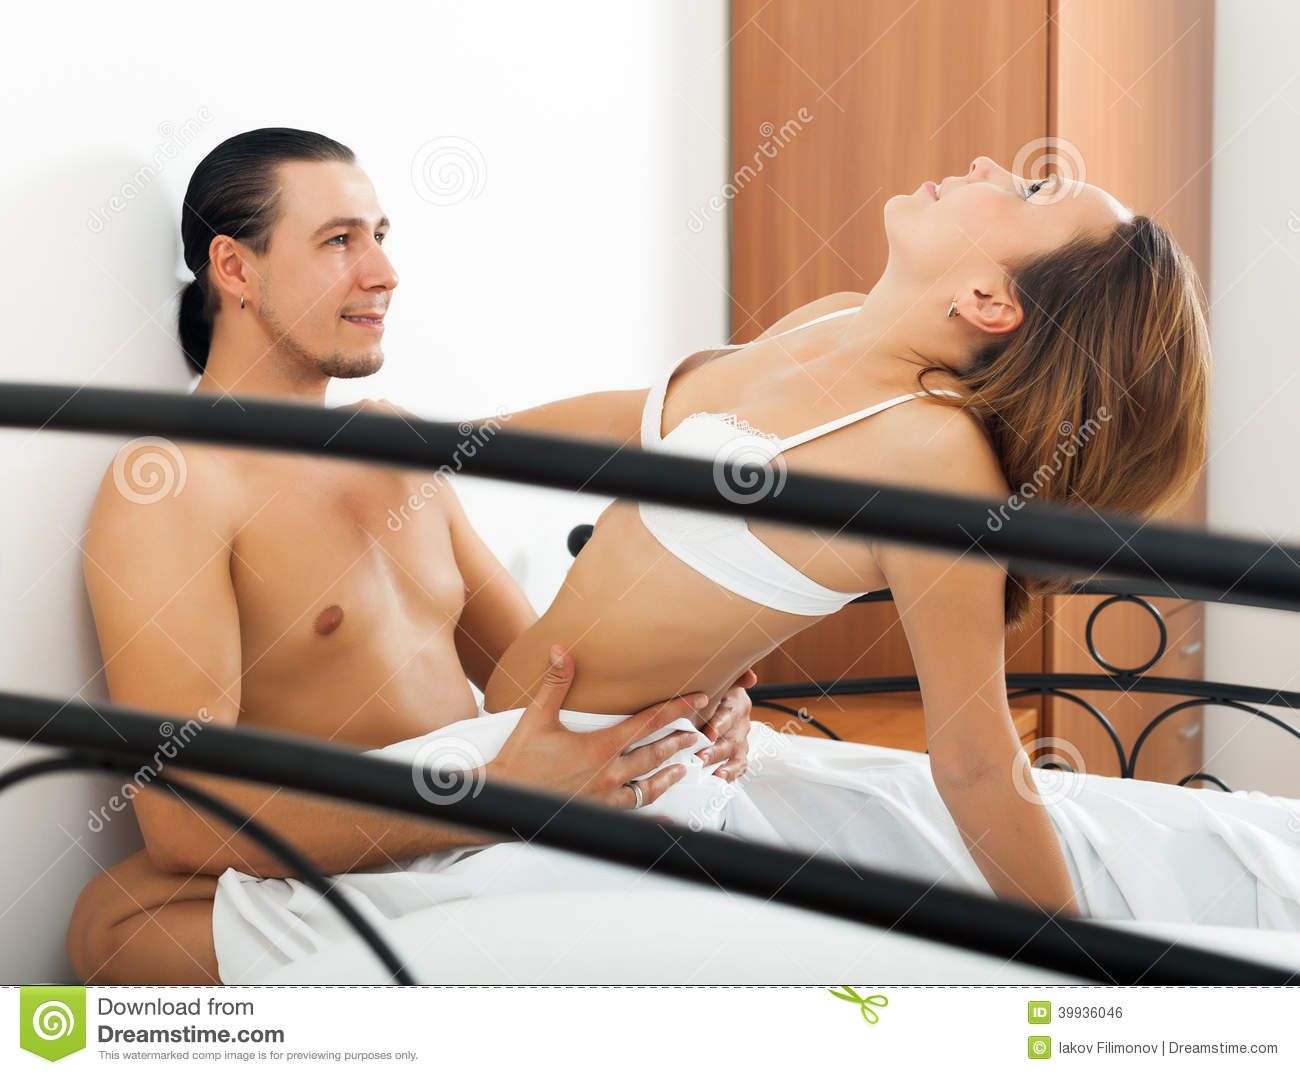 Man and woman moving naked sex